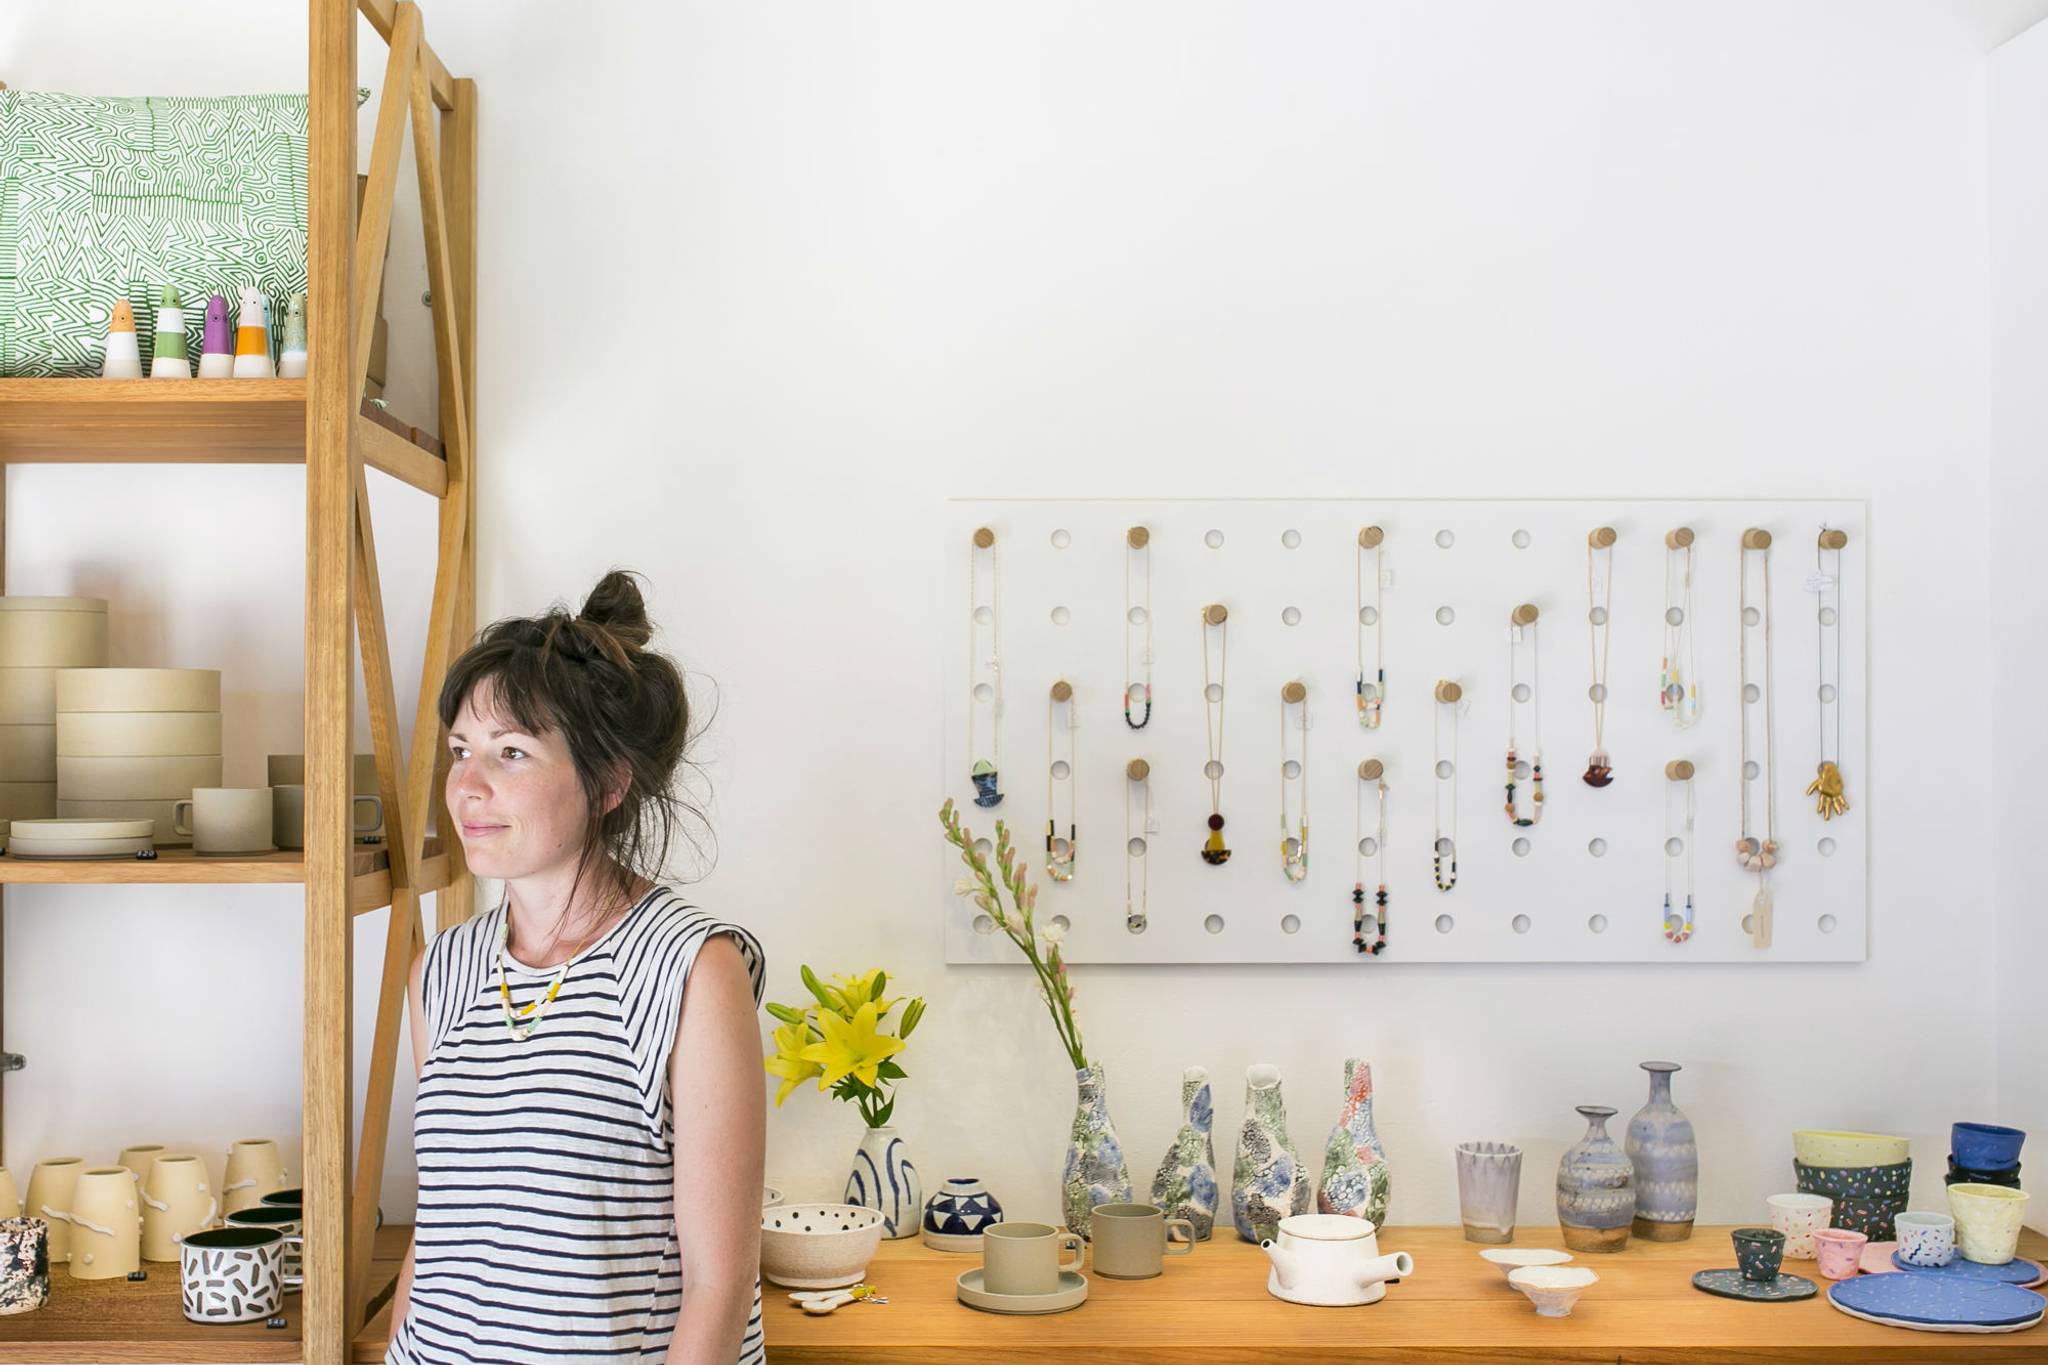 Etsy promotes brick-and-mortar stores